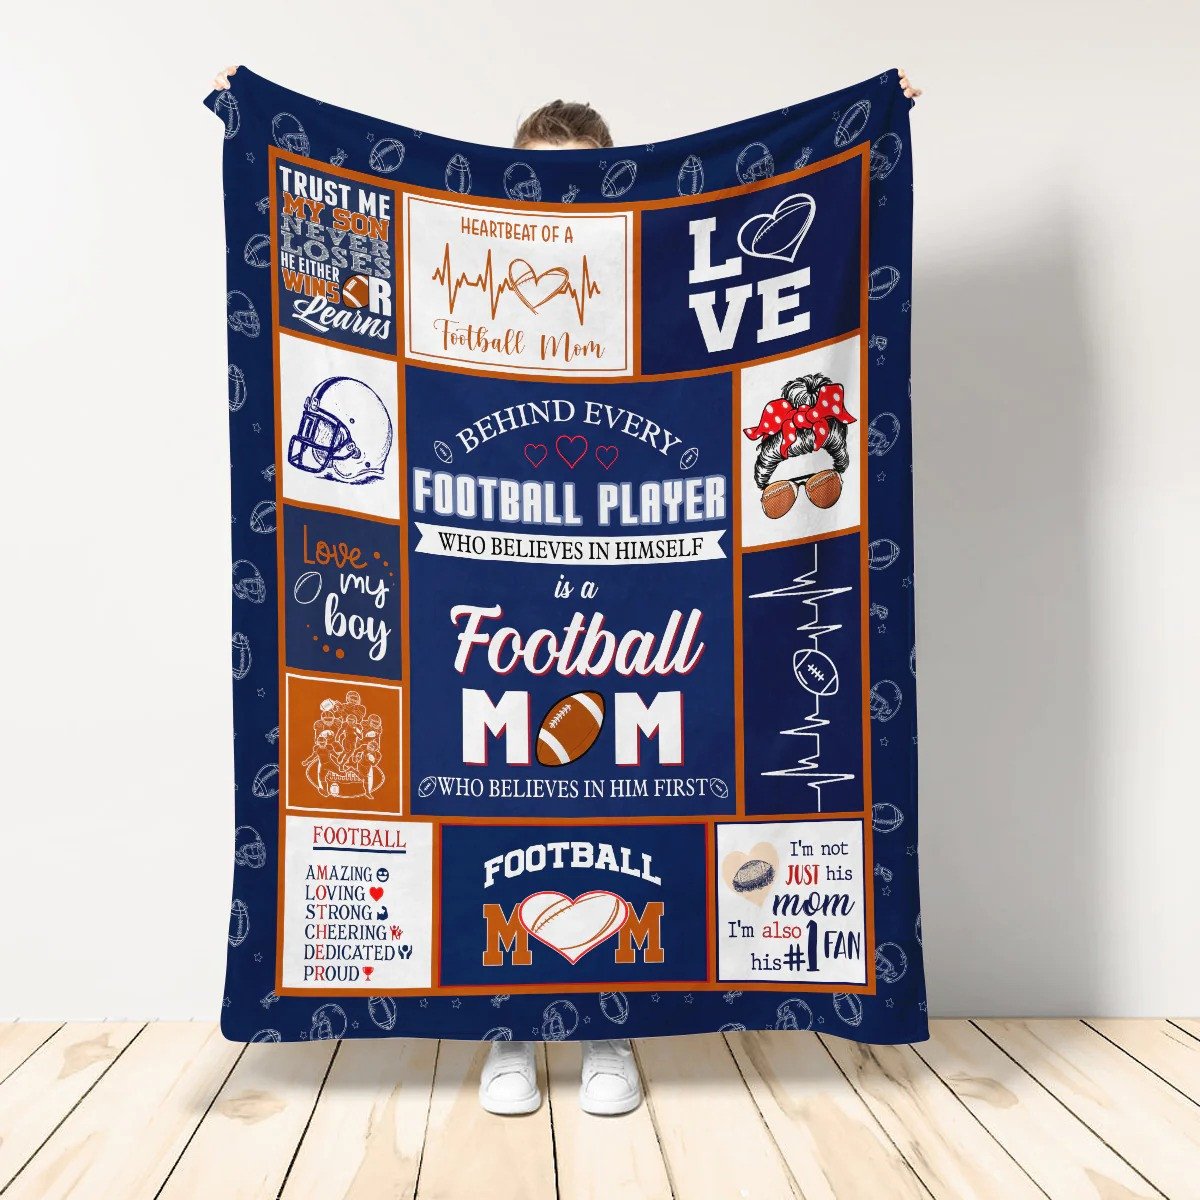 Football Mom Blanket, Behind Every Football Player Who Believes In Himself Is A Football Mom